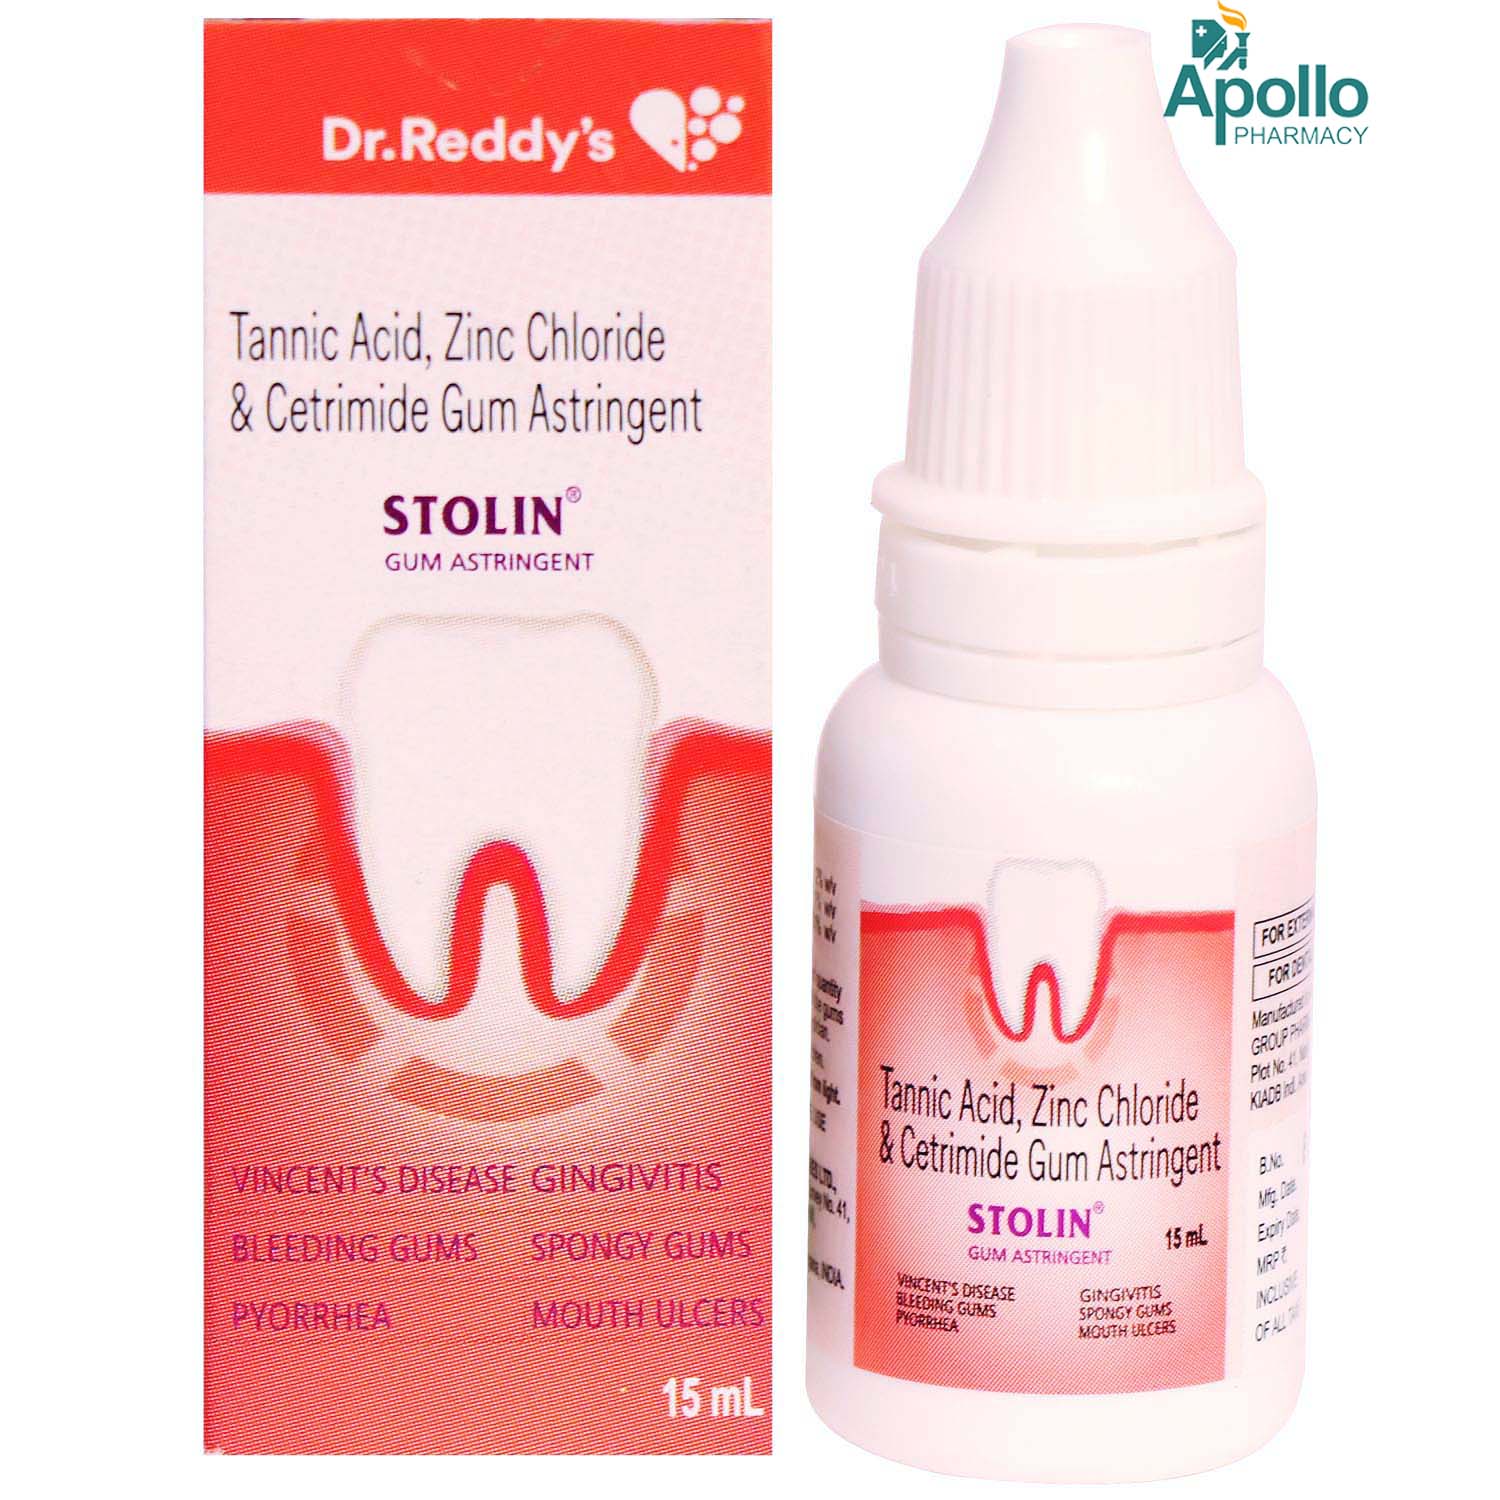 Stolin Gum Astringent Ml Price Uses Side Effects Composition Apollo Pharmacy